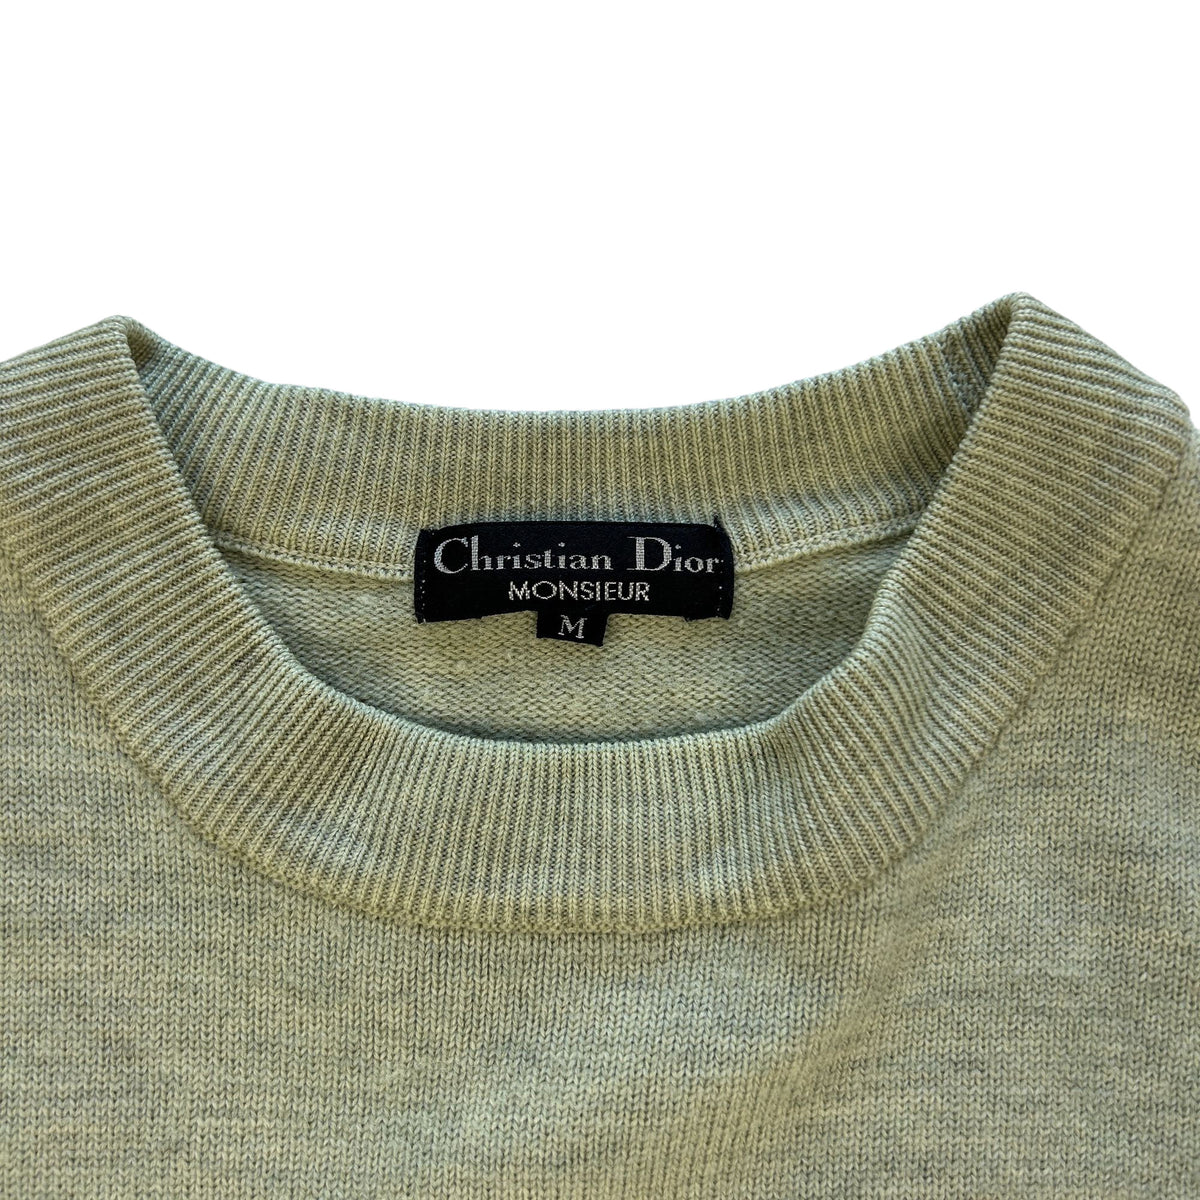 Vintage Christian Dior Monsieur Knitted Jumper Woman&#39;s Size M